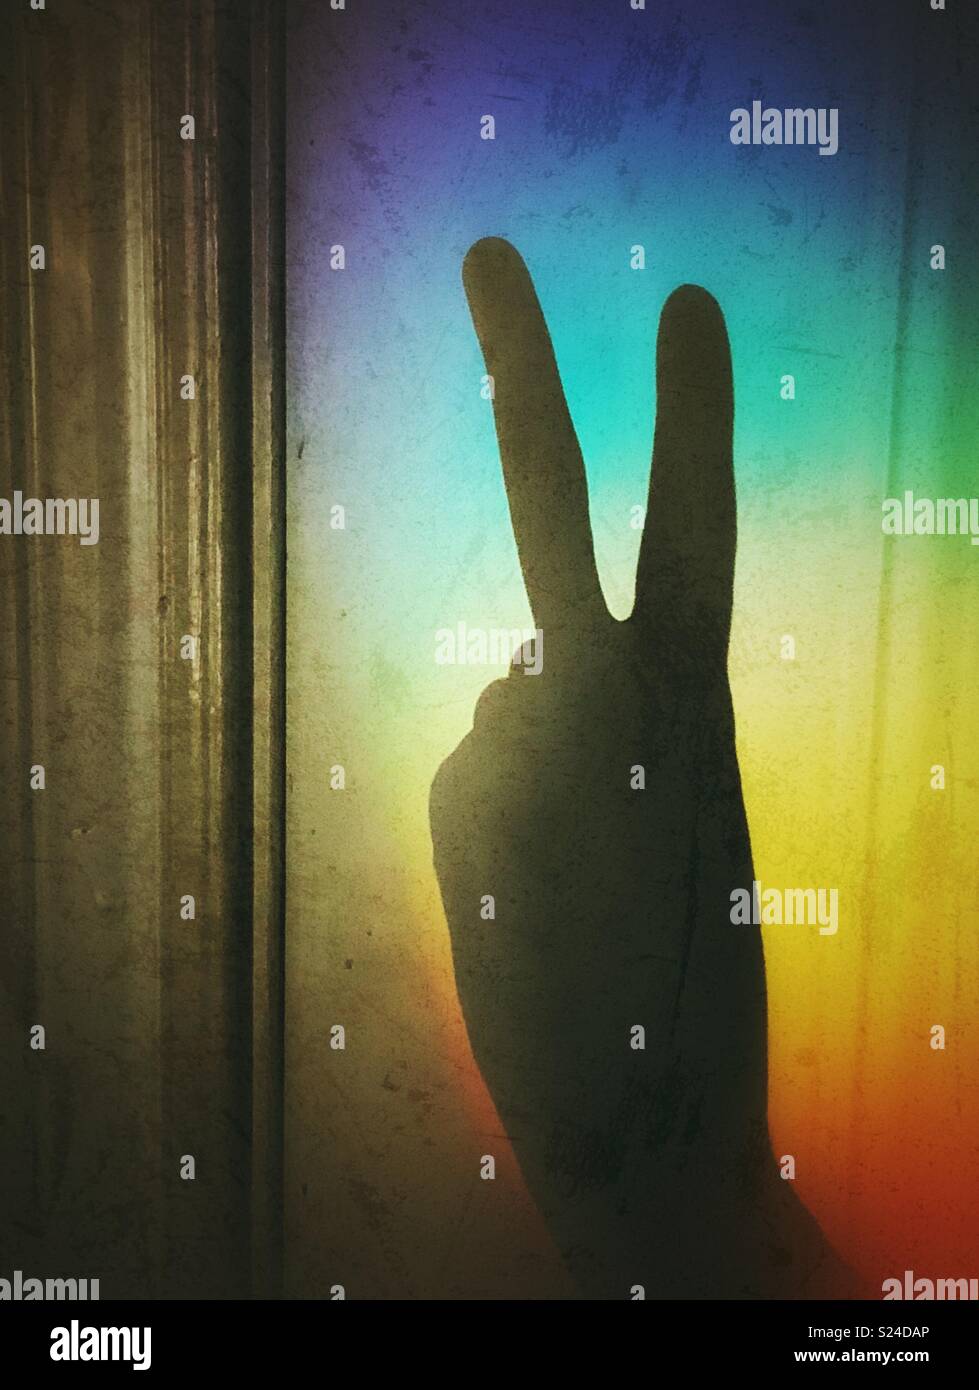 Shadow silhouette of persons hand giving peace symbol against rainbow light Stock Photo